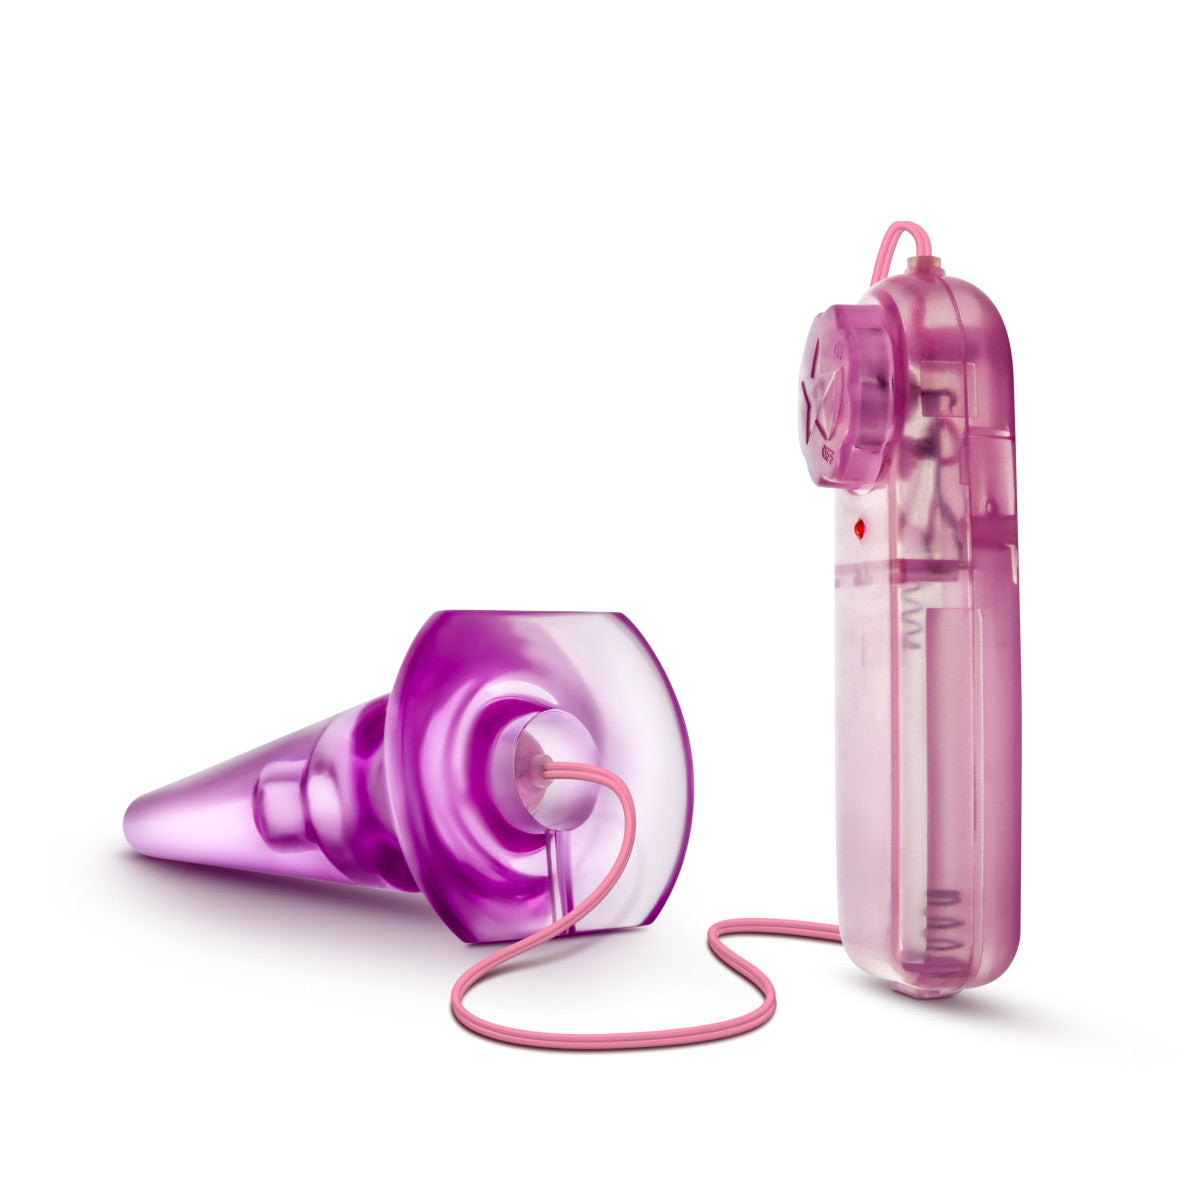 Pink translucent classic shaped butt plug with a tapered tip, slimmer neck and flared base. Features an opening at the bottom that fits the included wired egg shaped bullet. Twist dial on controller adjusts intensity. Additional images show alternate angles.